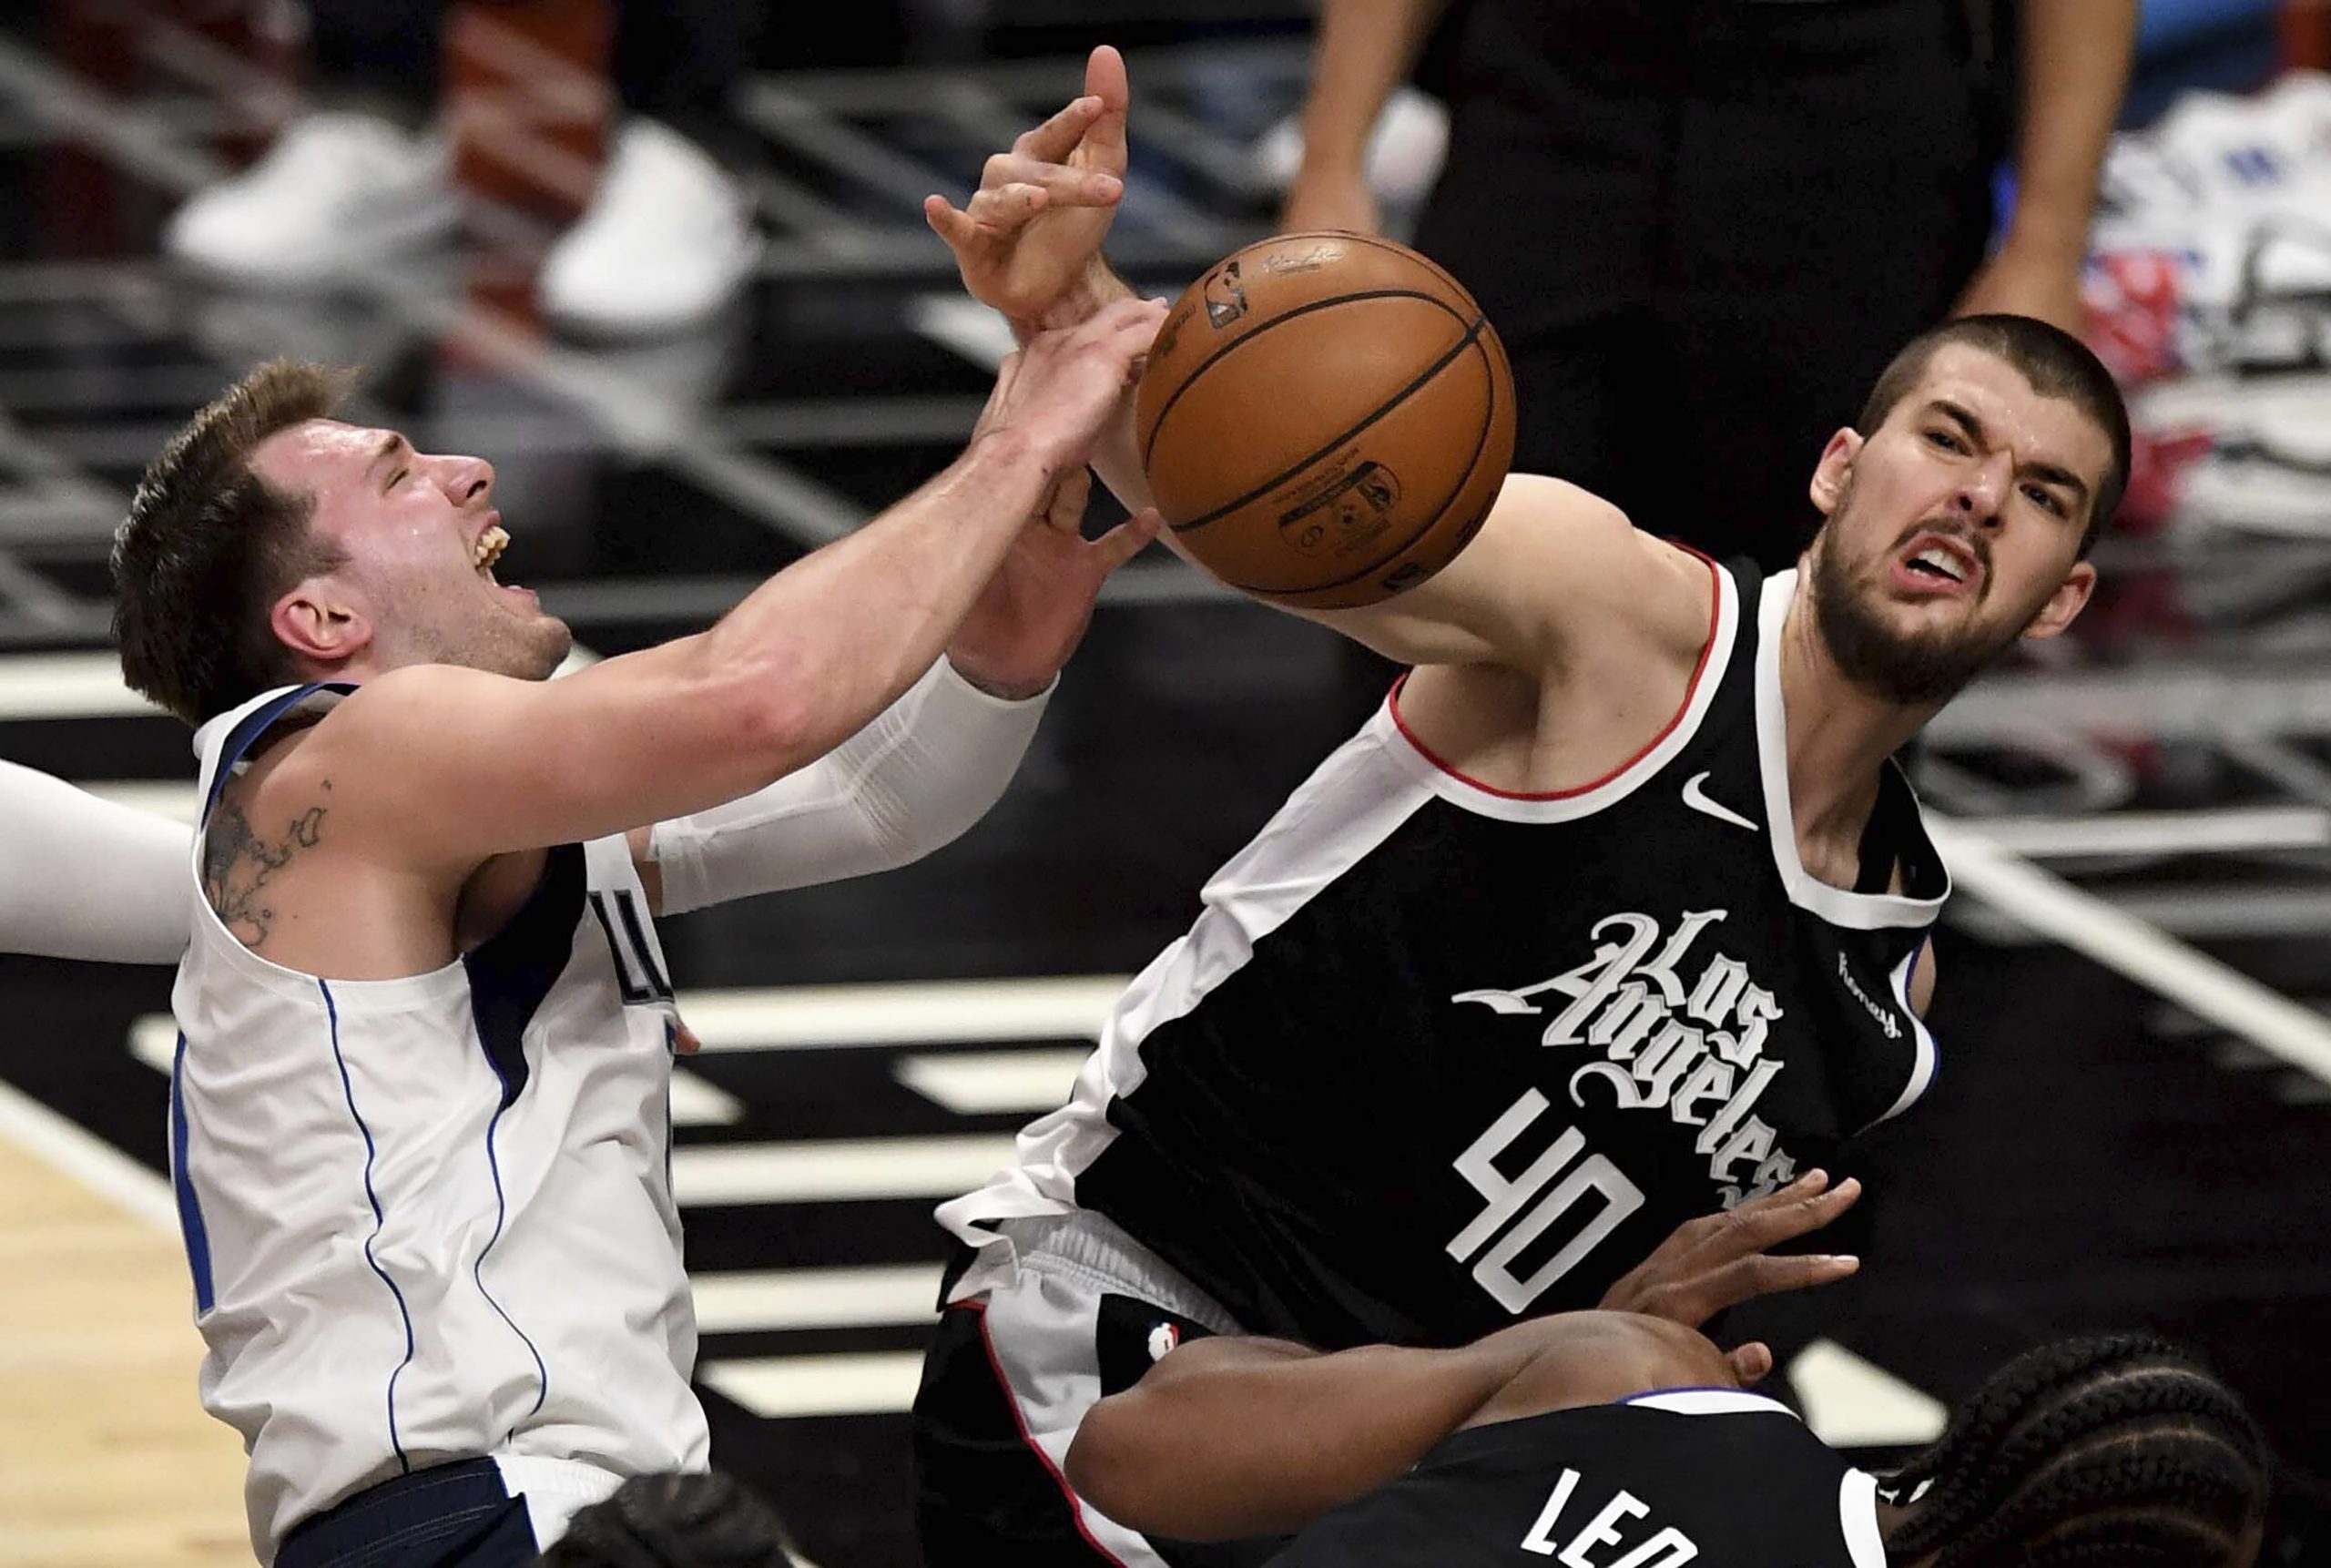 Luka Doncic #77 of the Dallas Mavericks is fouled by Ivica Zubac #40 of the LA Clippers in the first half of game five of the Western Conference First Round NBA Playoff basketball game at the Staples Center in Los Angeles on Wednesday, June 2, 2021. (Keith Birmingham/The Orange County Register via AP)/The Orange County Register via AP)